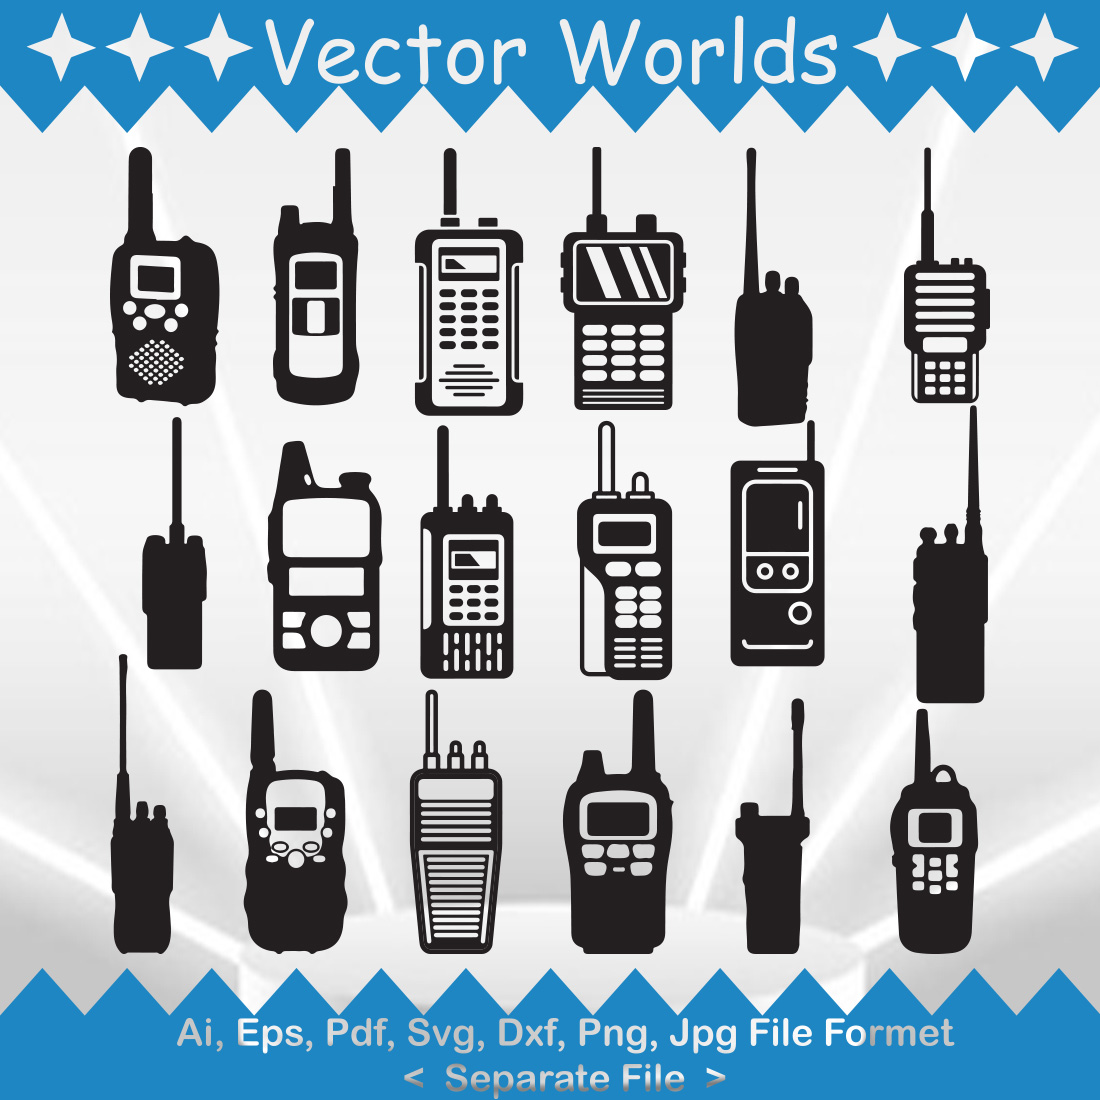 Collection of vector elegant images of walkie-talkie silhouettes.